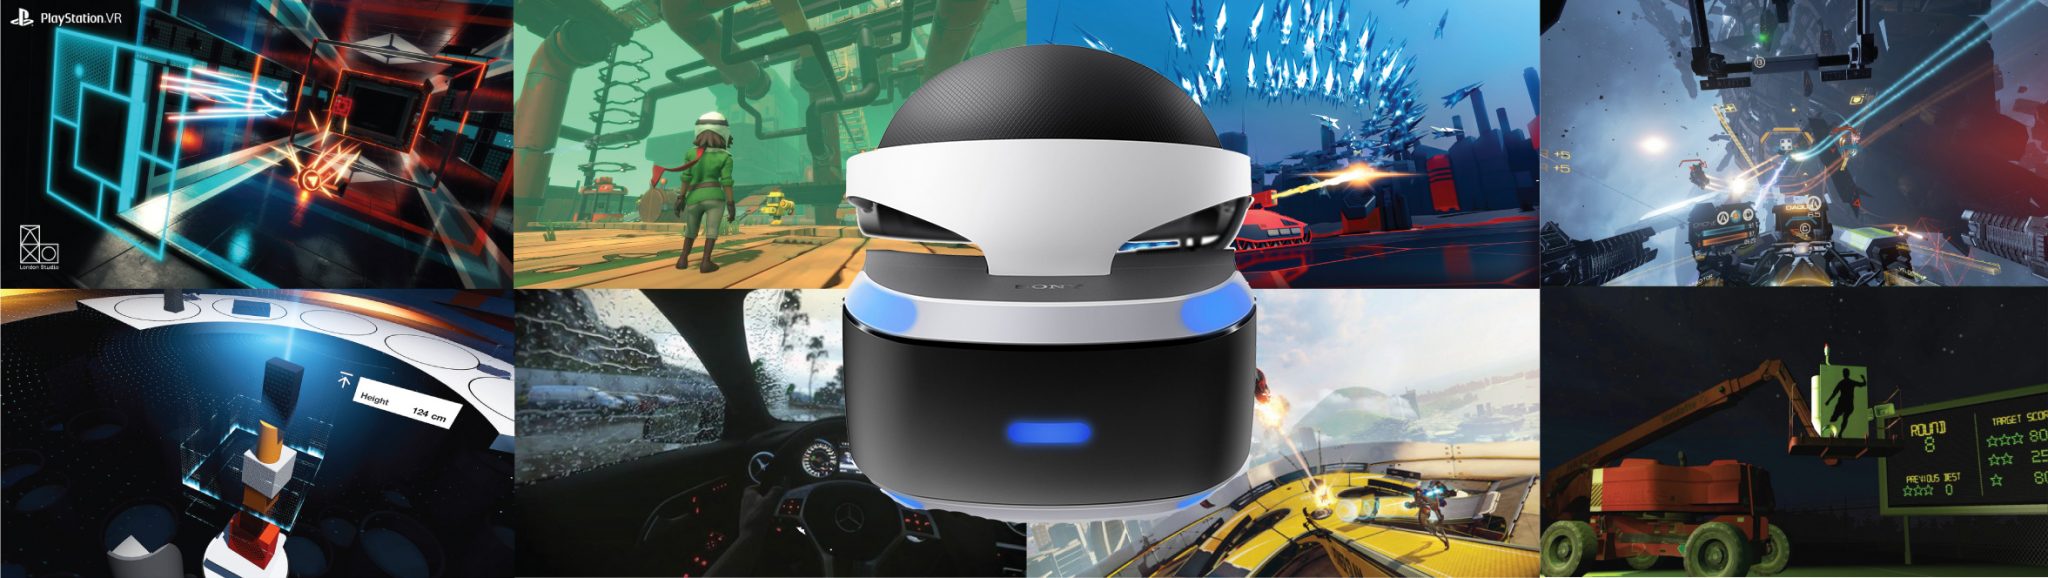 What’s on PlayStation VR’s demo disc